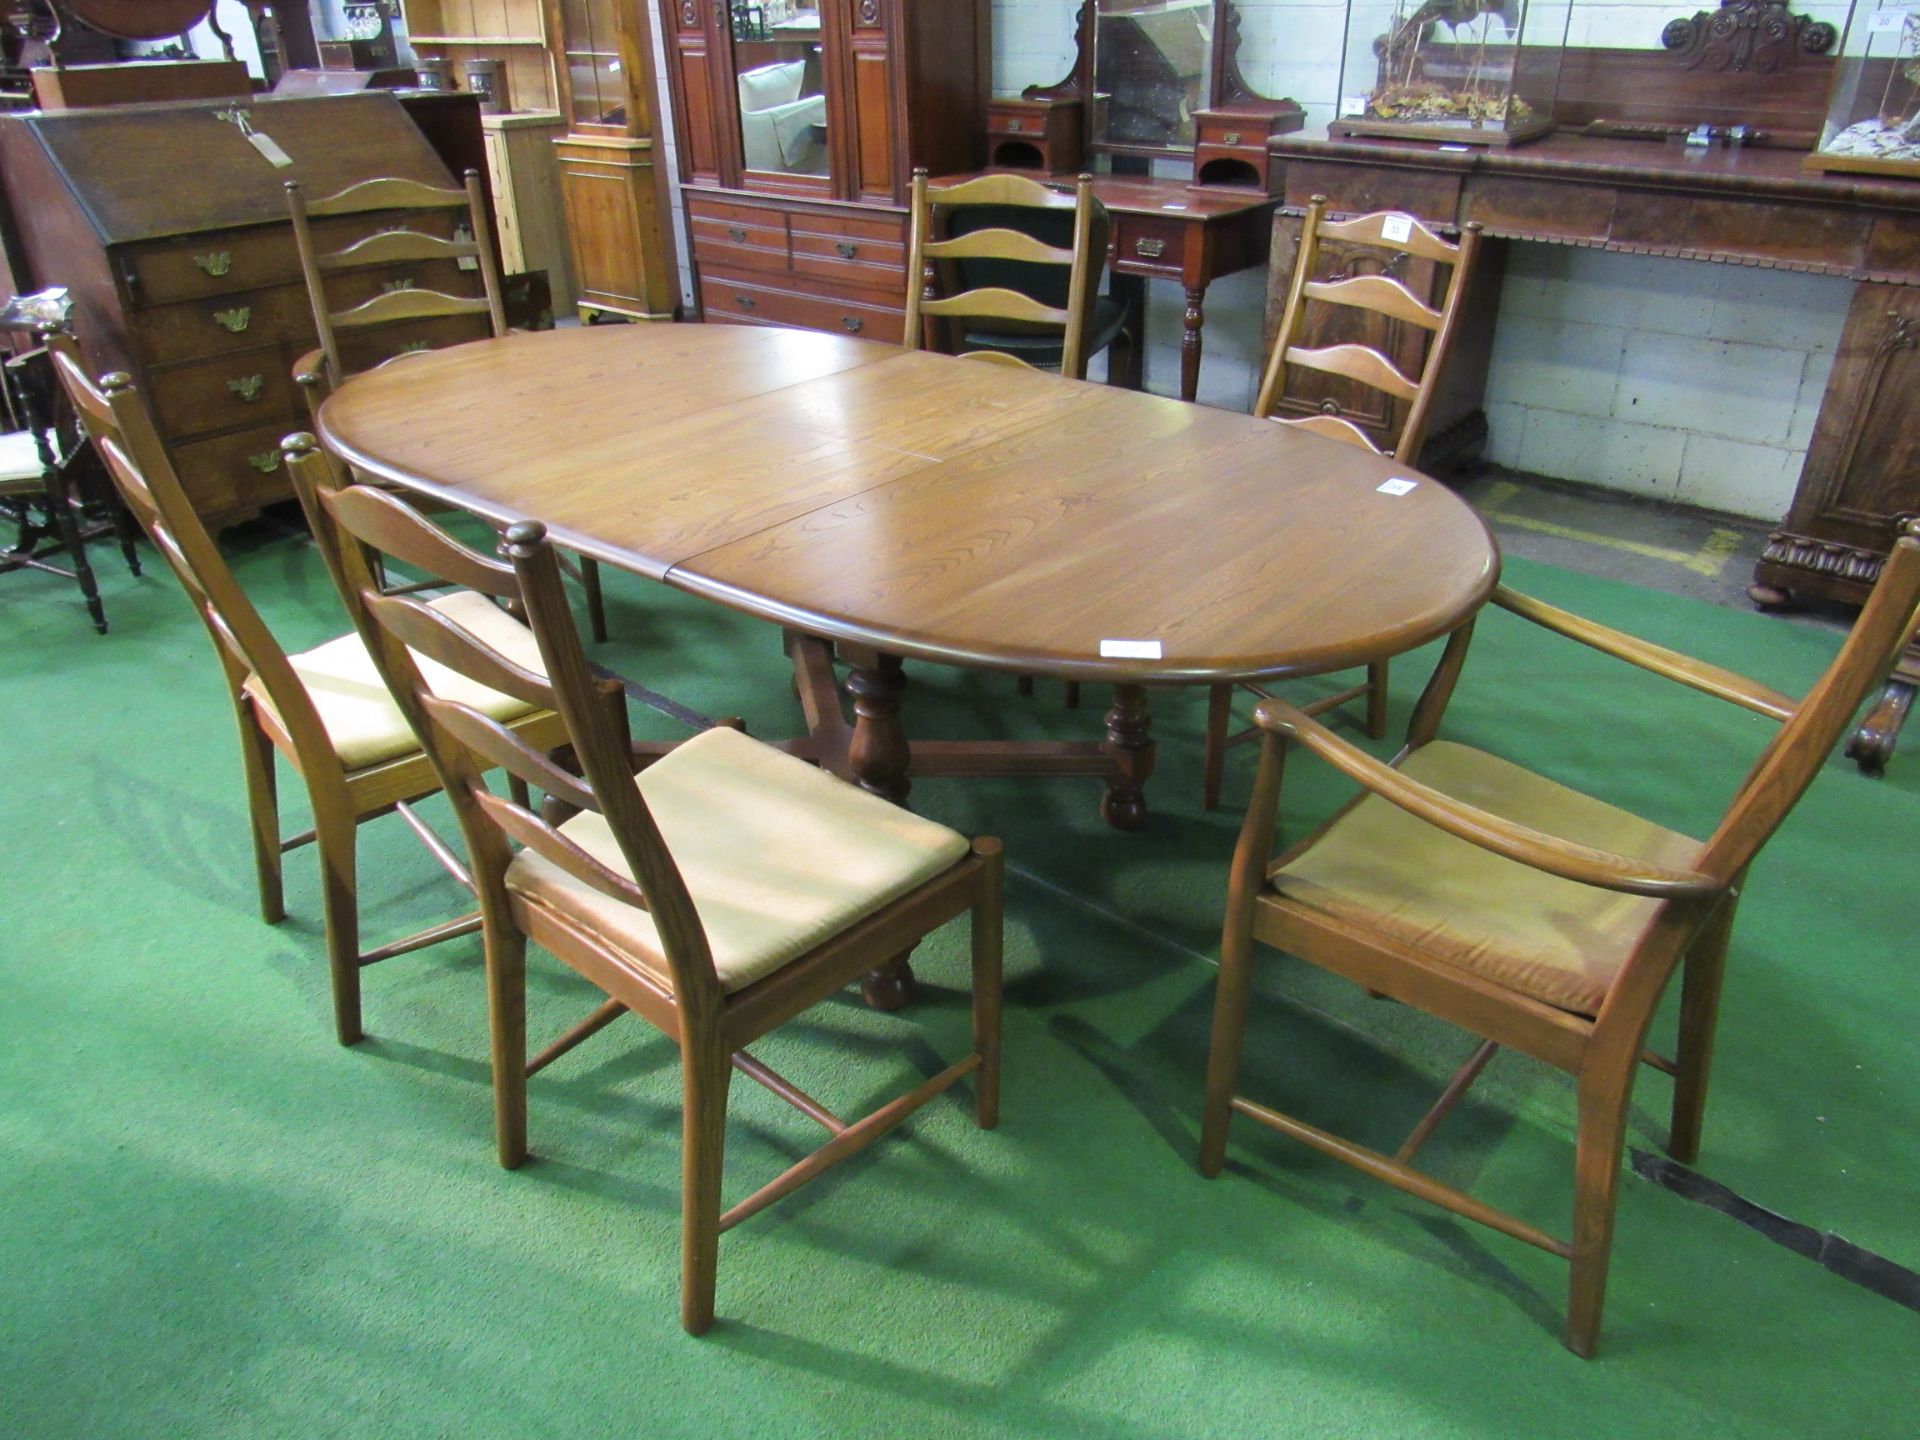 2 + 4 Ercol ladder back dining chairs to suit lot 32. Estimate £120-150. - Image 3 of 3